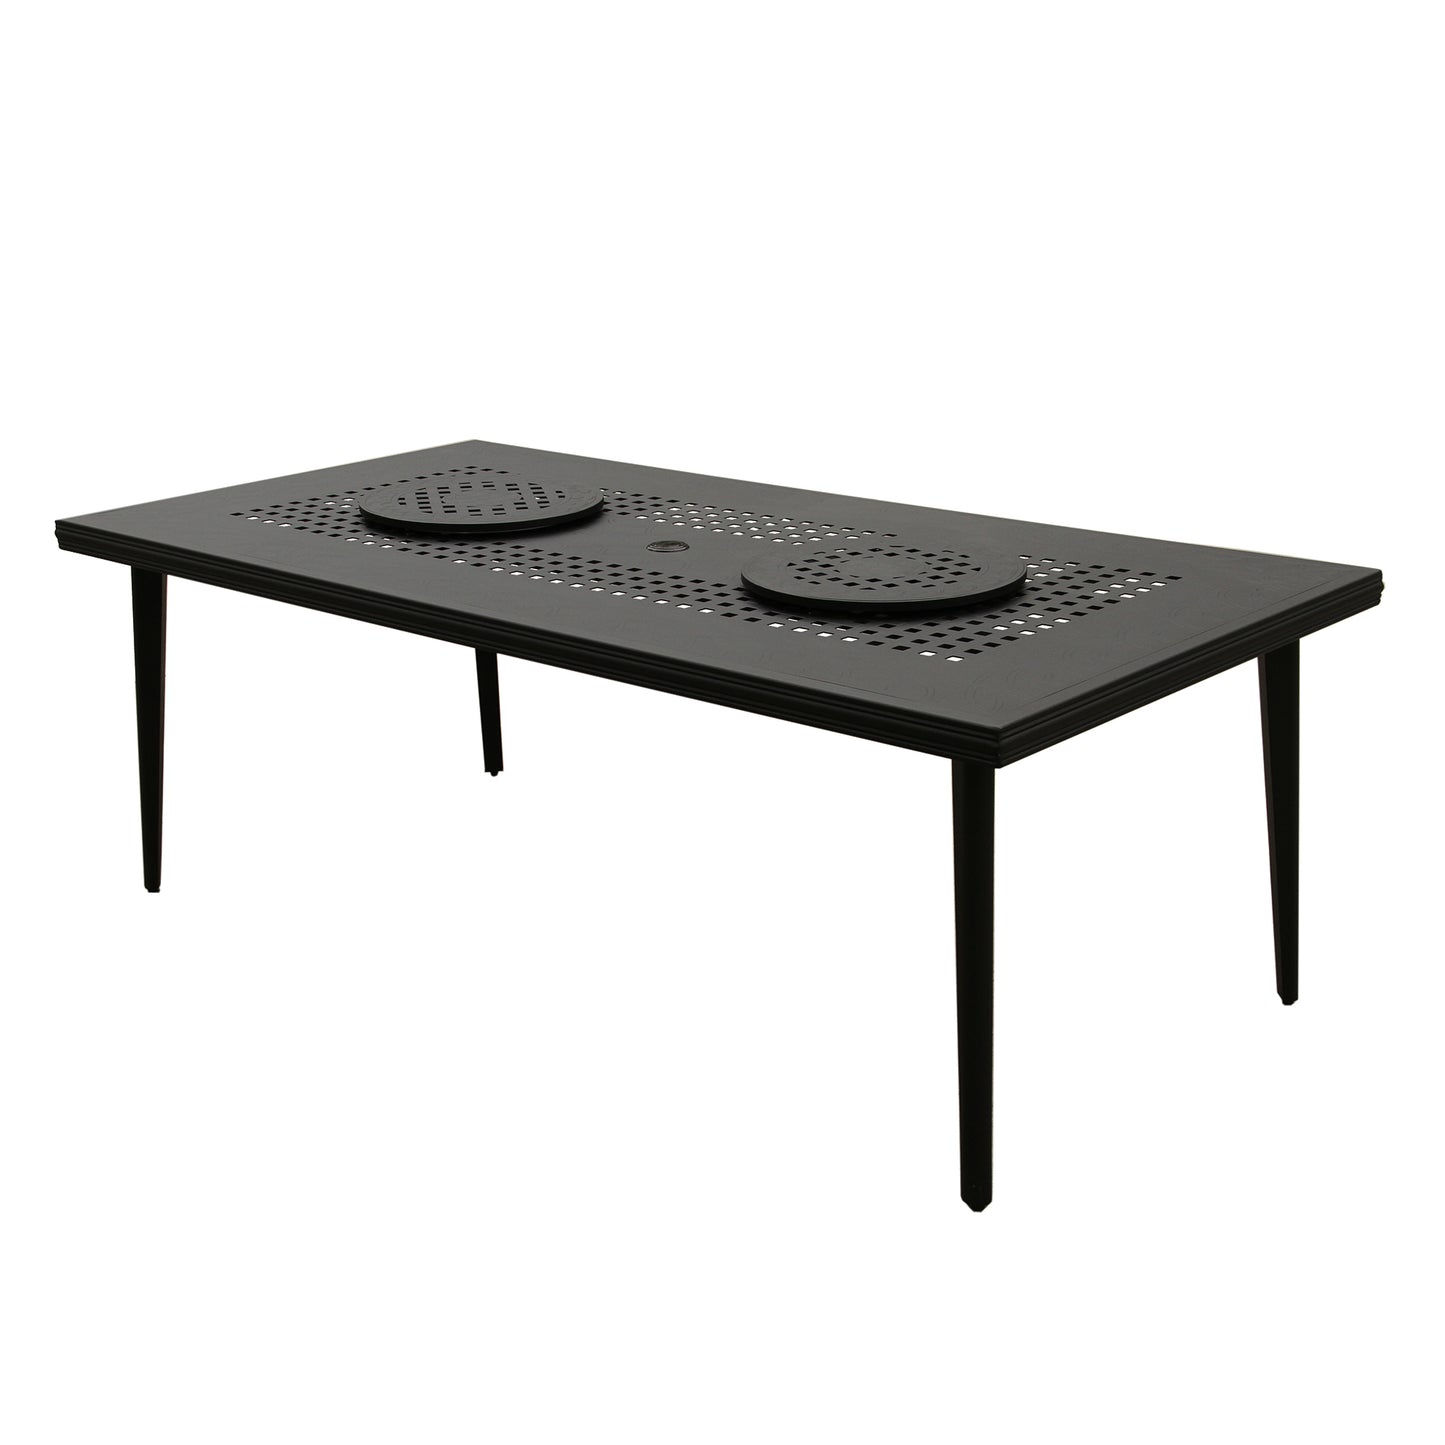 Aluminum Black 84-in Rectangle Large Patio Dining Table, Lazy Susans